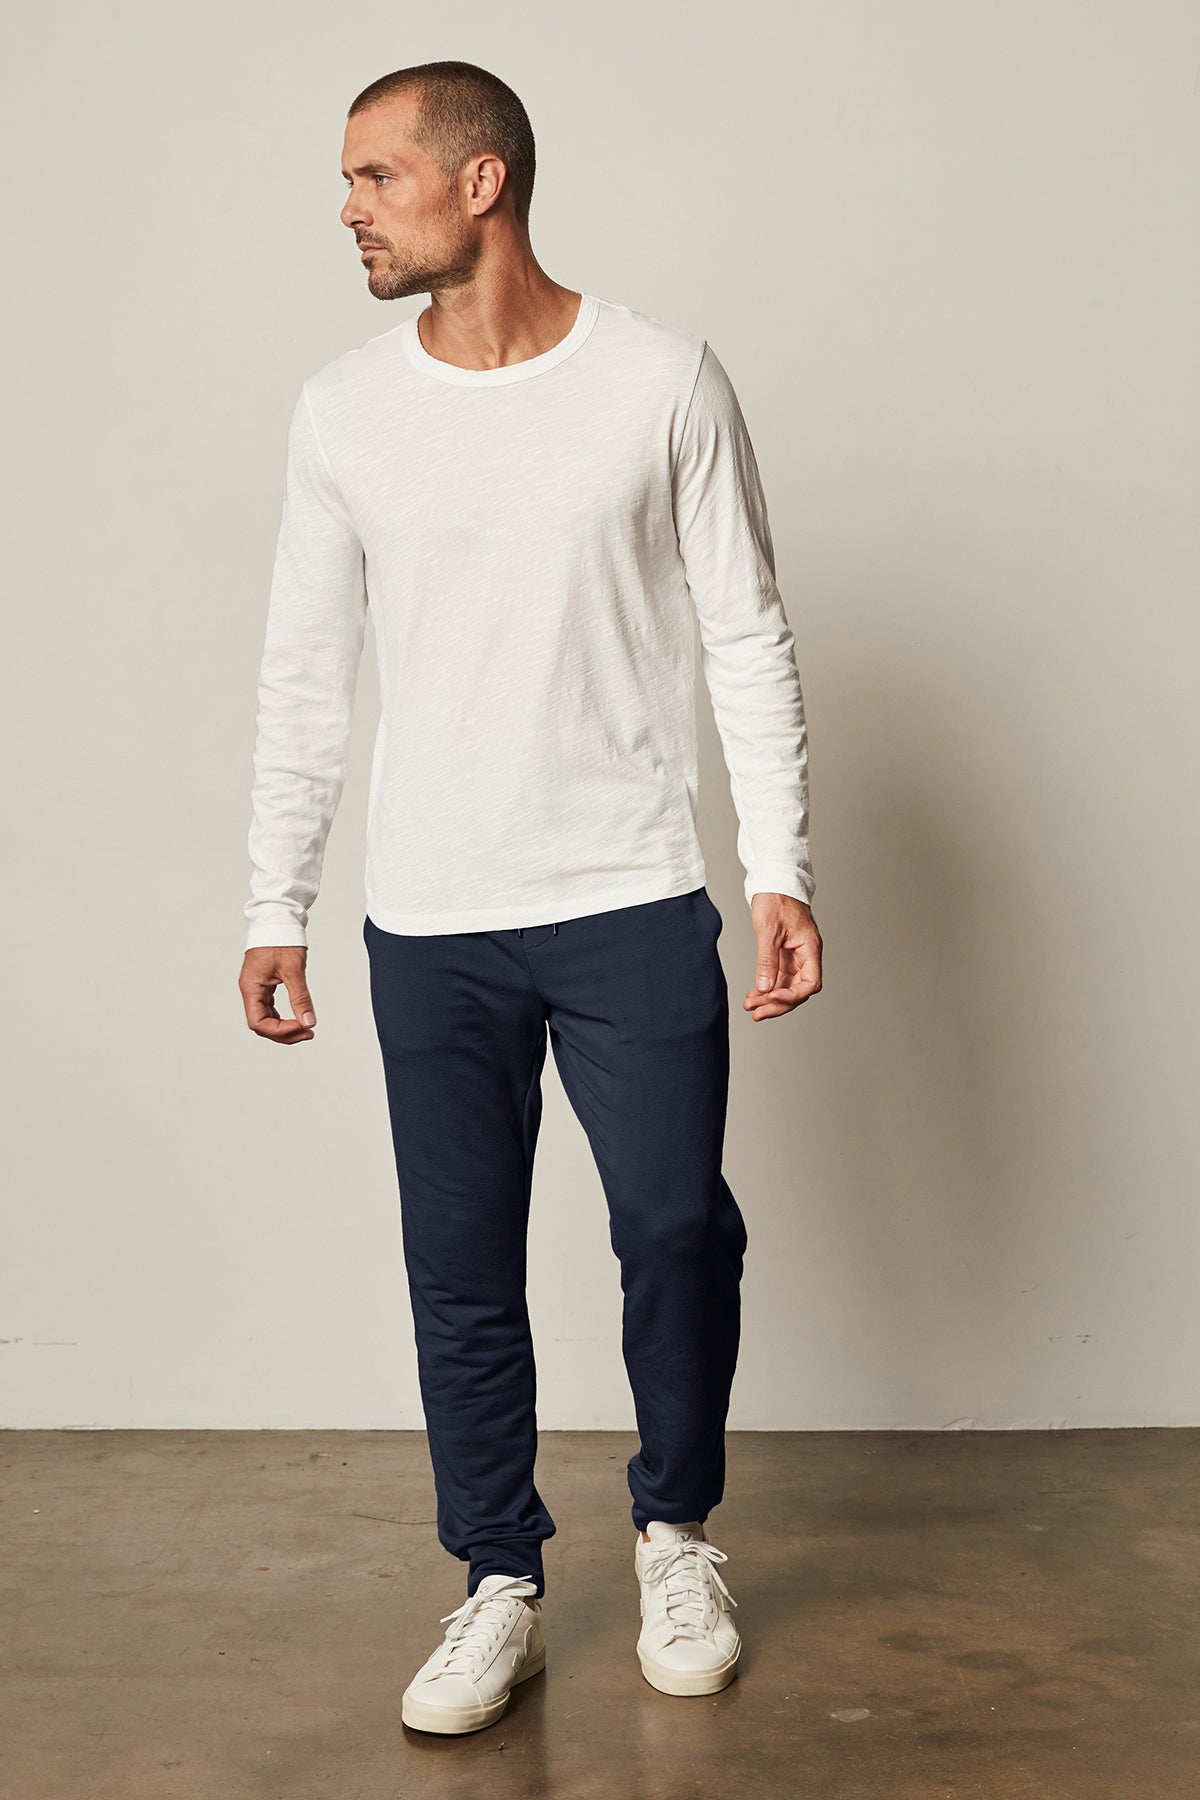 The model is wearing a white t-shirt and navy Velvet by Graham & Spencer CROSBY LUXE FLEECE JOGGER sweatpants.-25288496021697